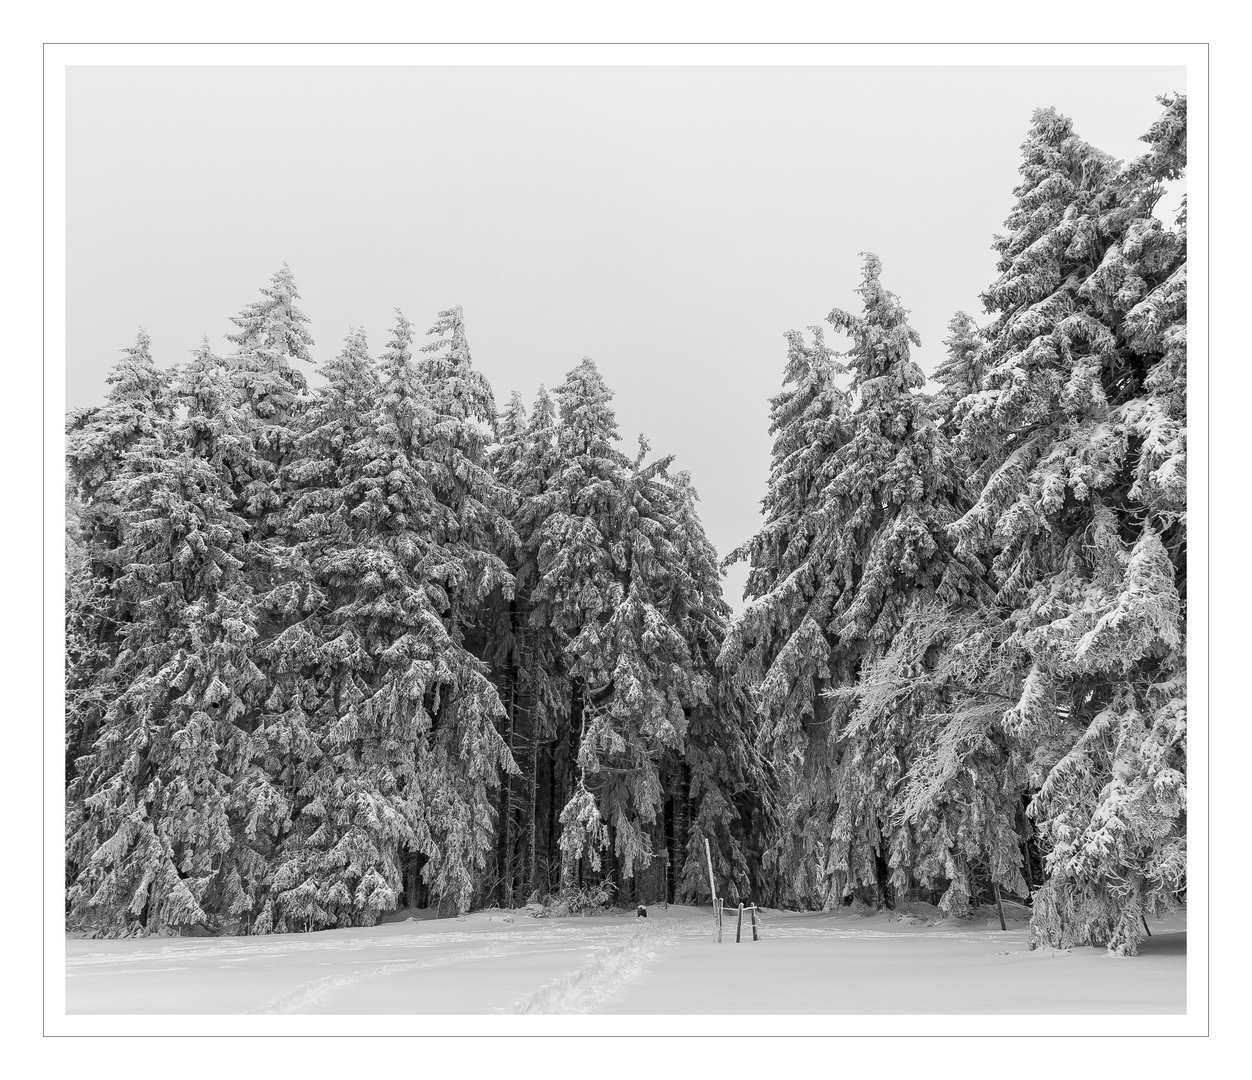 The Black Forest in winter